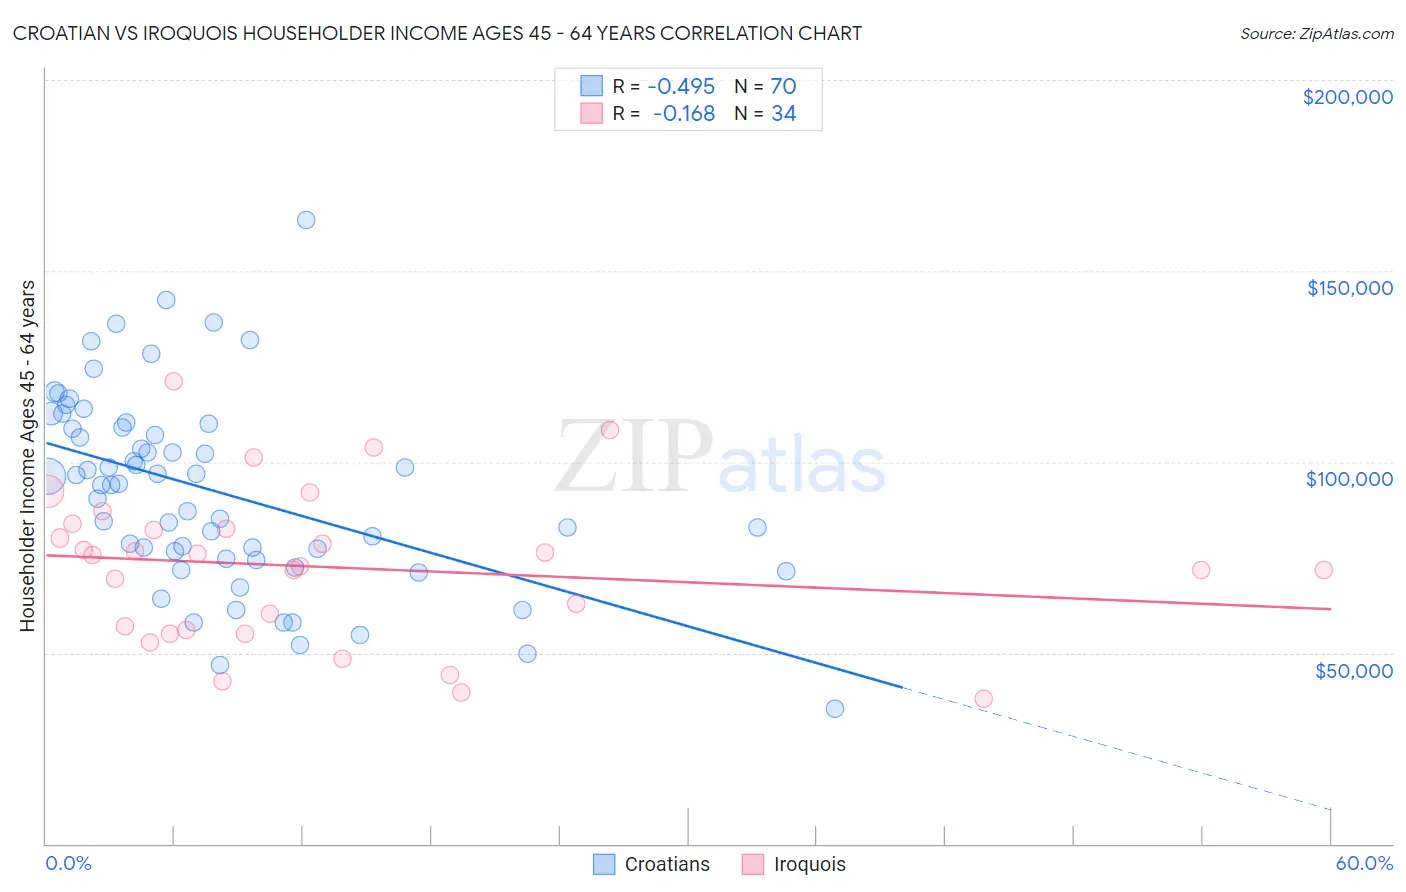 Croatian vs Iroquois Householder Income Ages 45 - 64 years